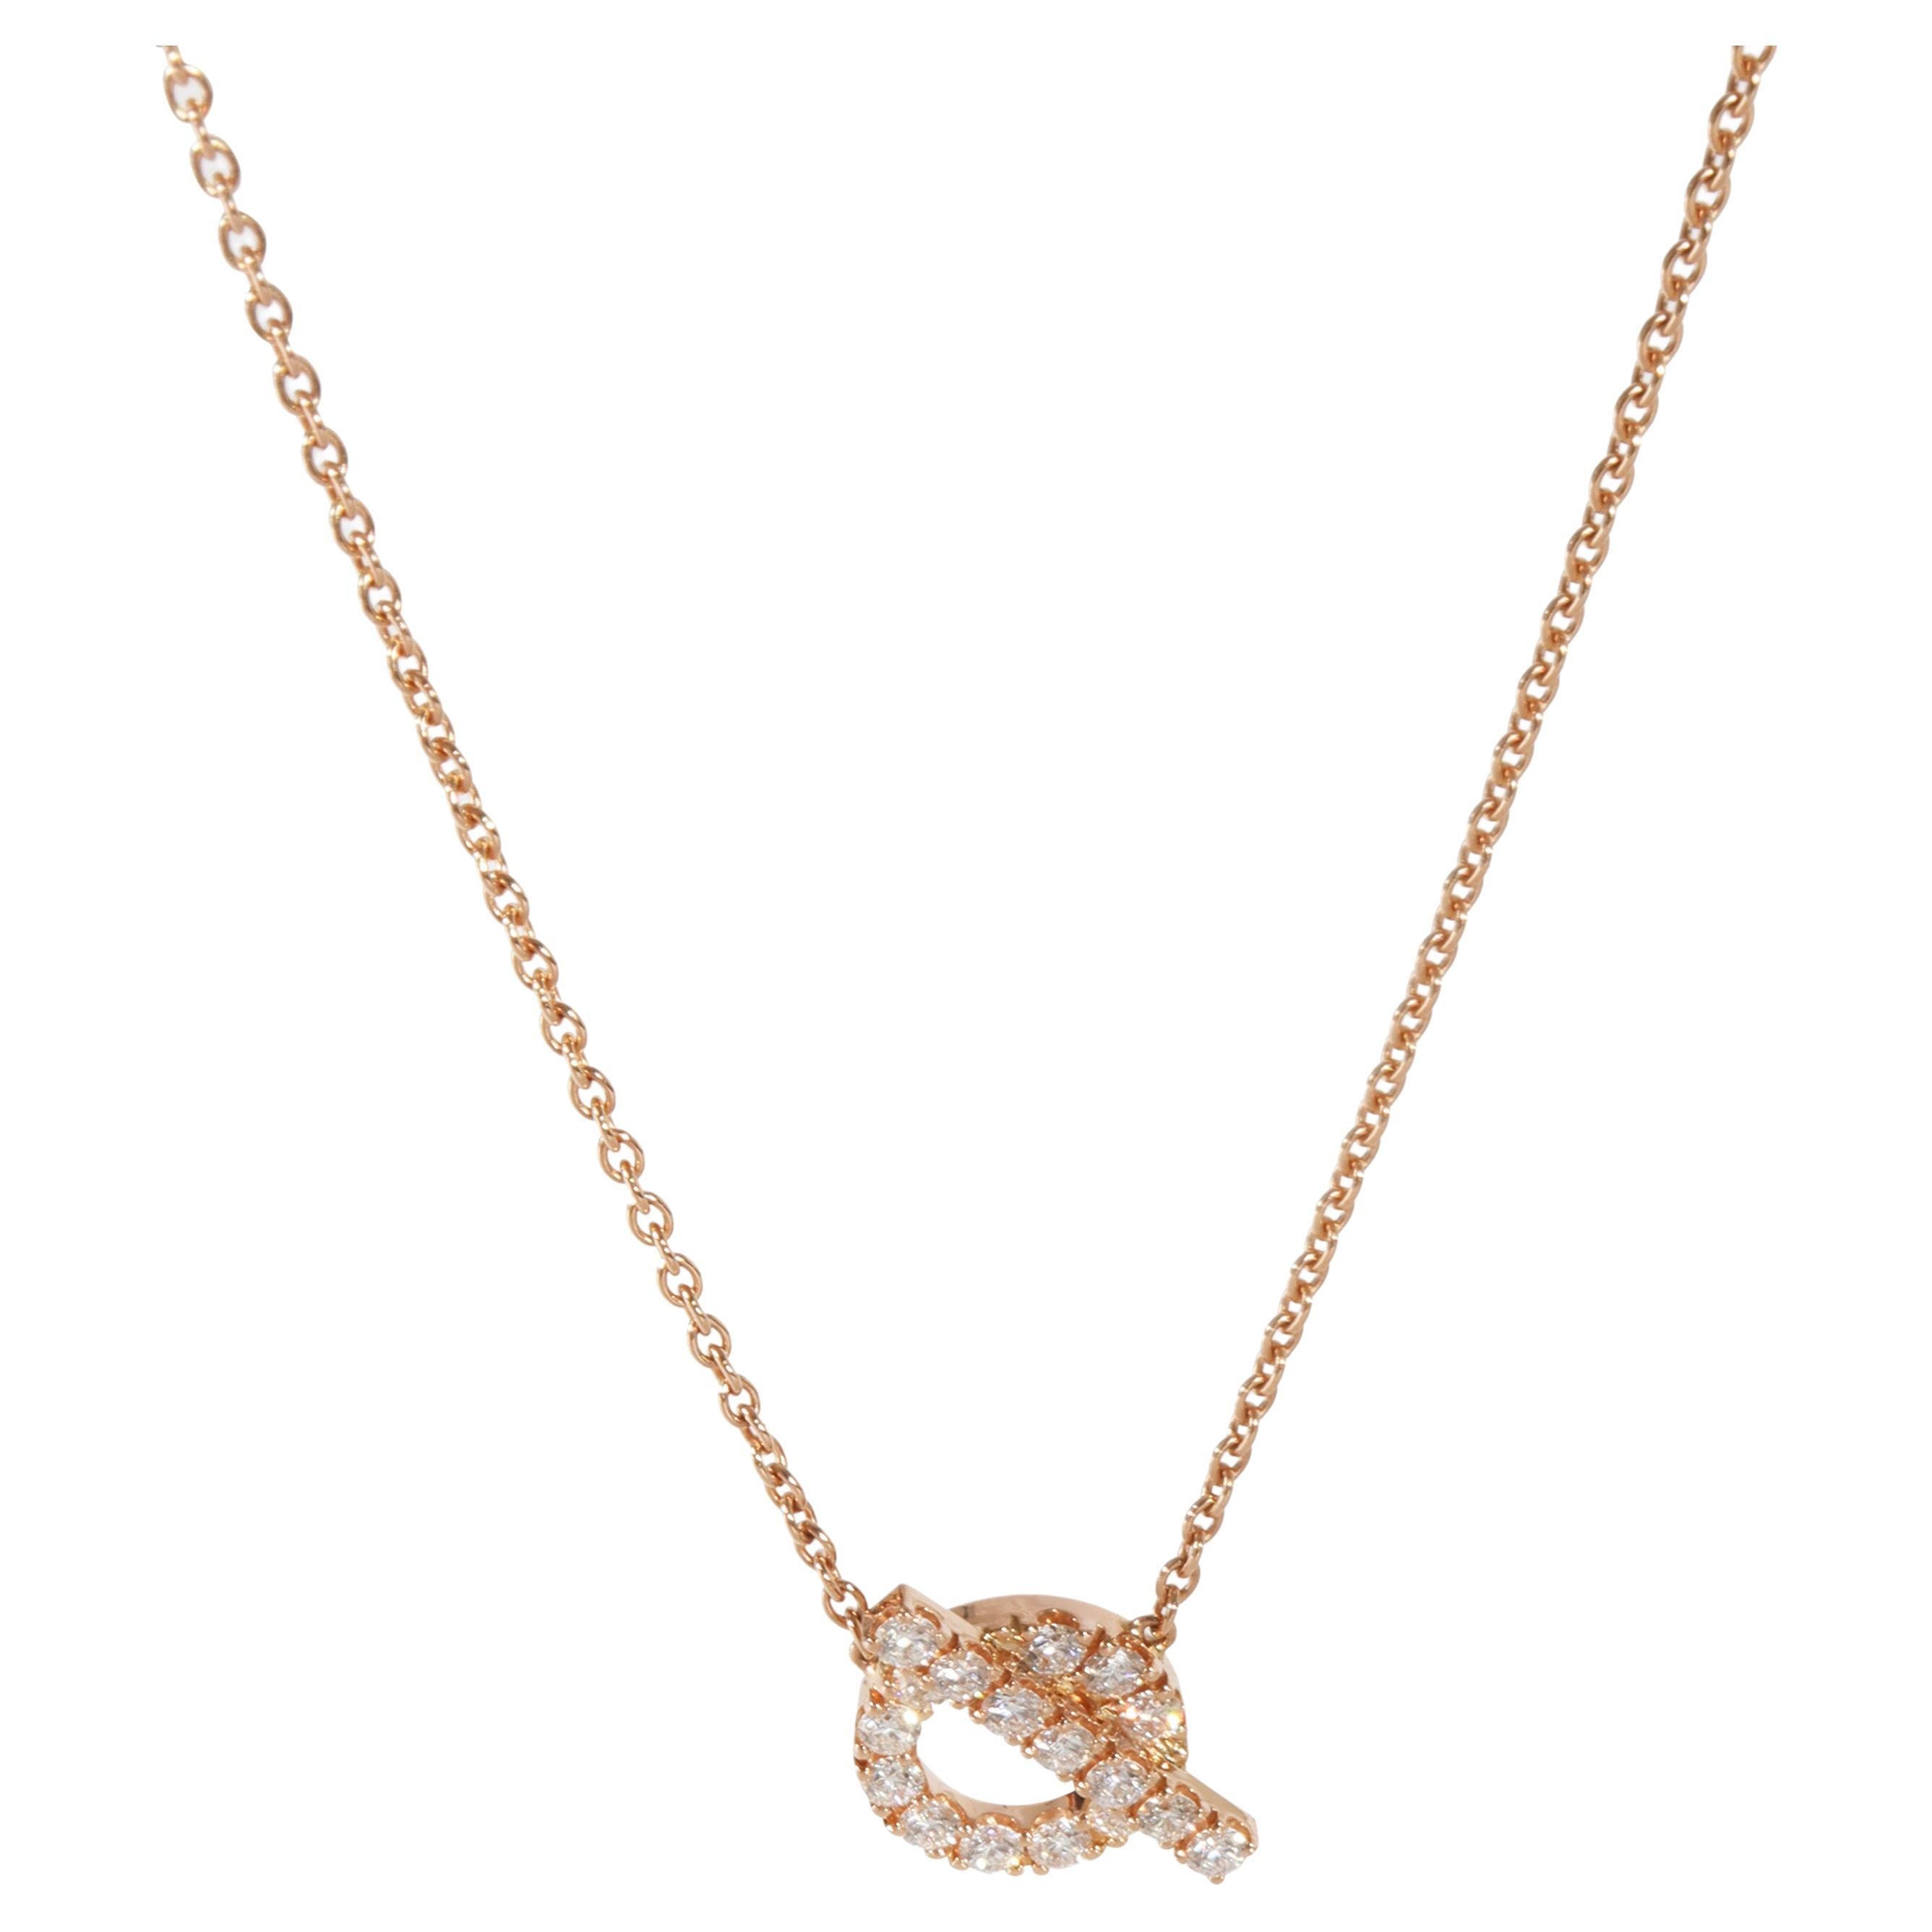 Hermès Finesse Pendant with Diamonds in 18k Rose Gold 0.46 CTW For Sale